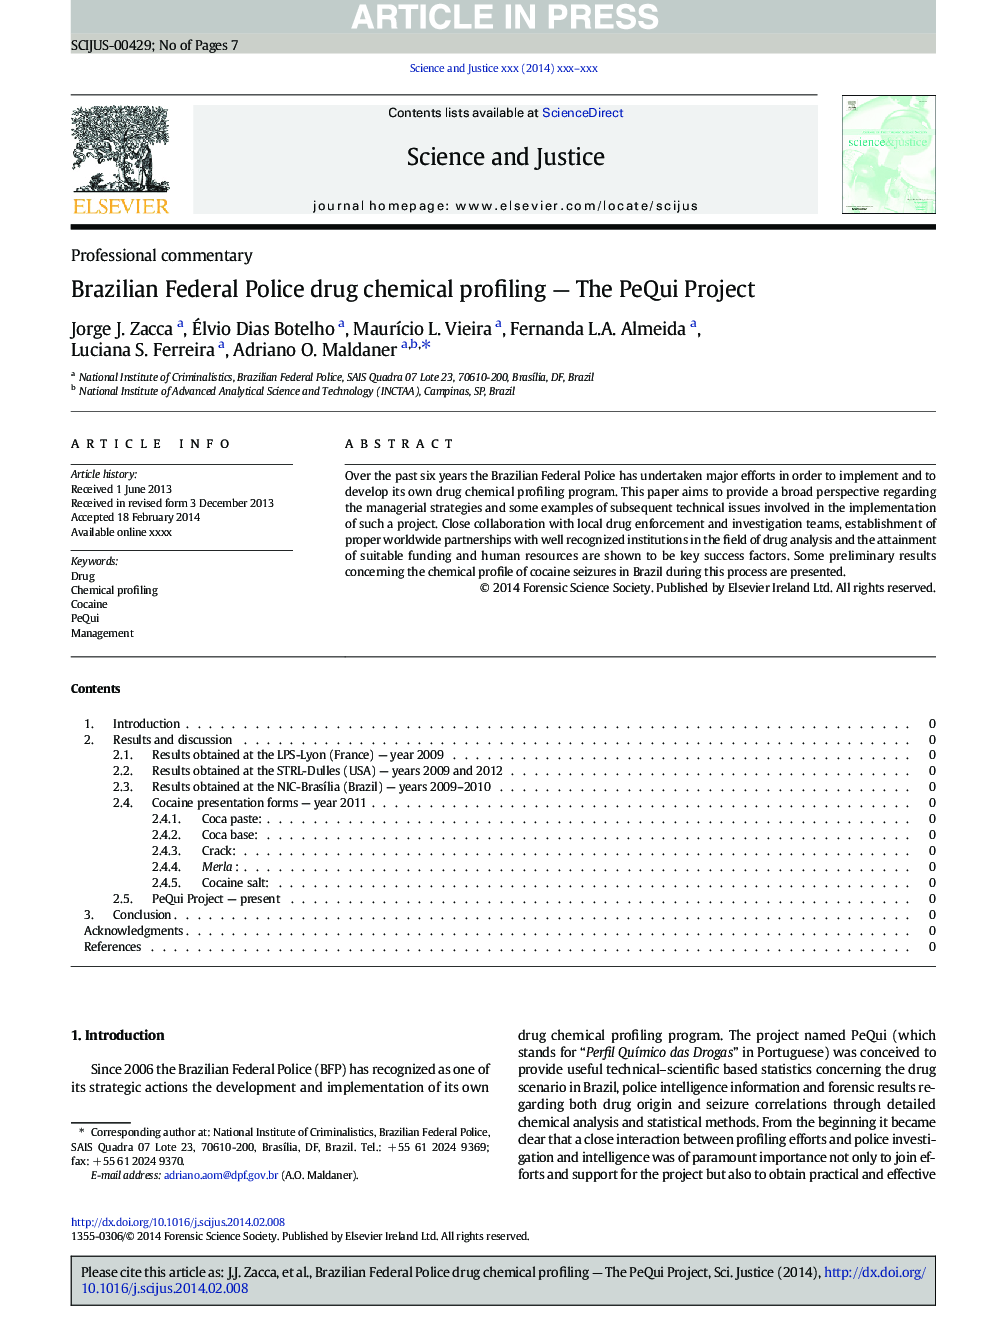 Brazilian Federal Police drug chemical profiling - The PeQui Project